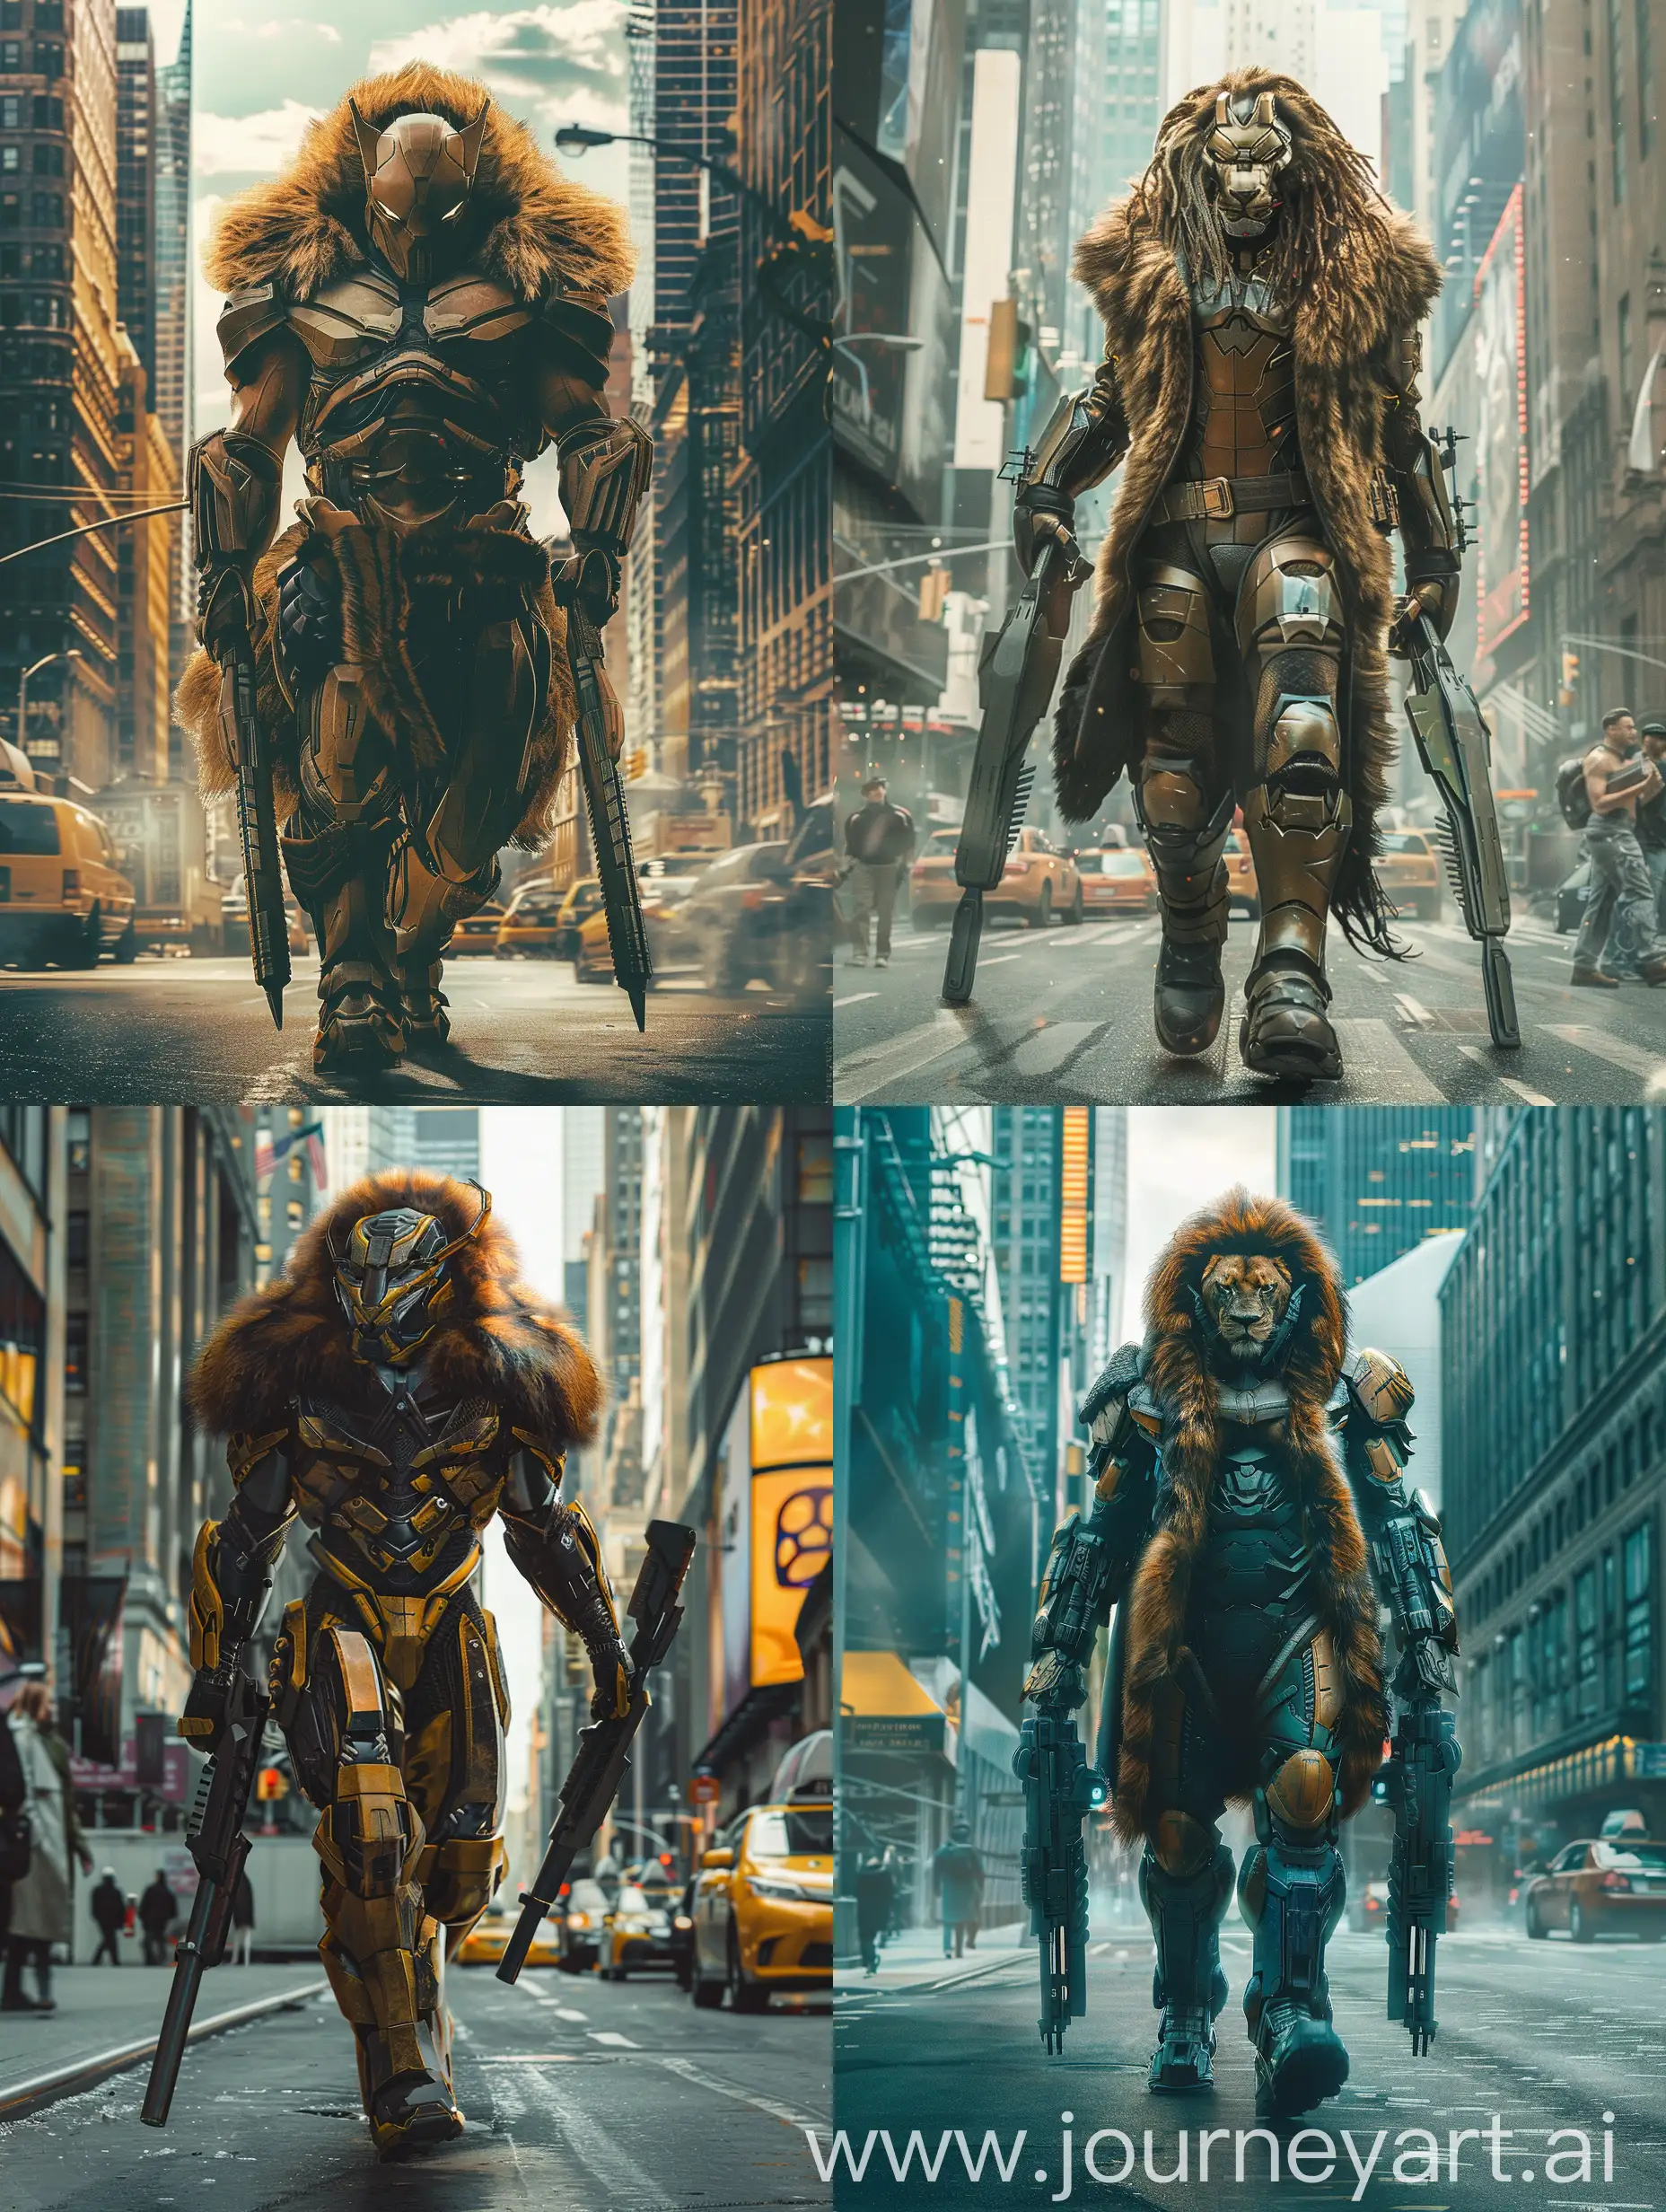 Marvel (Kraven the hunter) (8K) full body walking through New York with weapons in hands with a futuristic style with classic lion fur coat